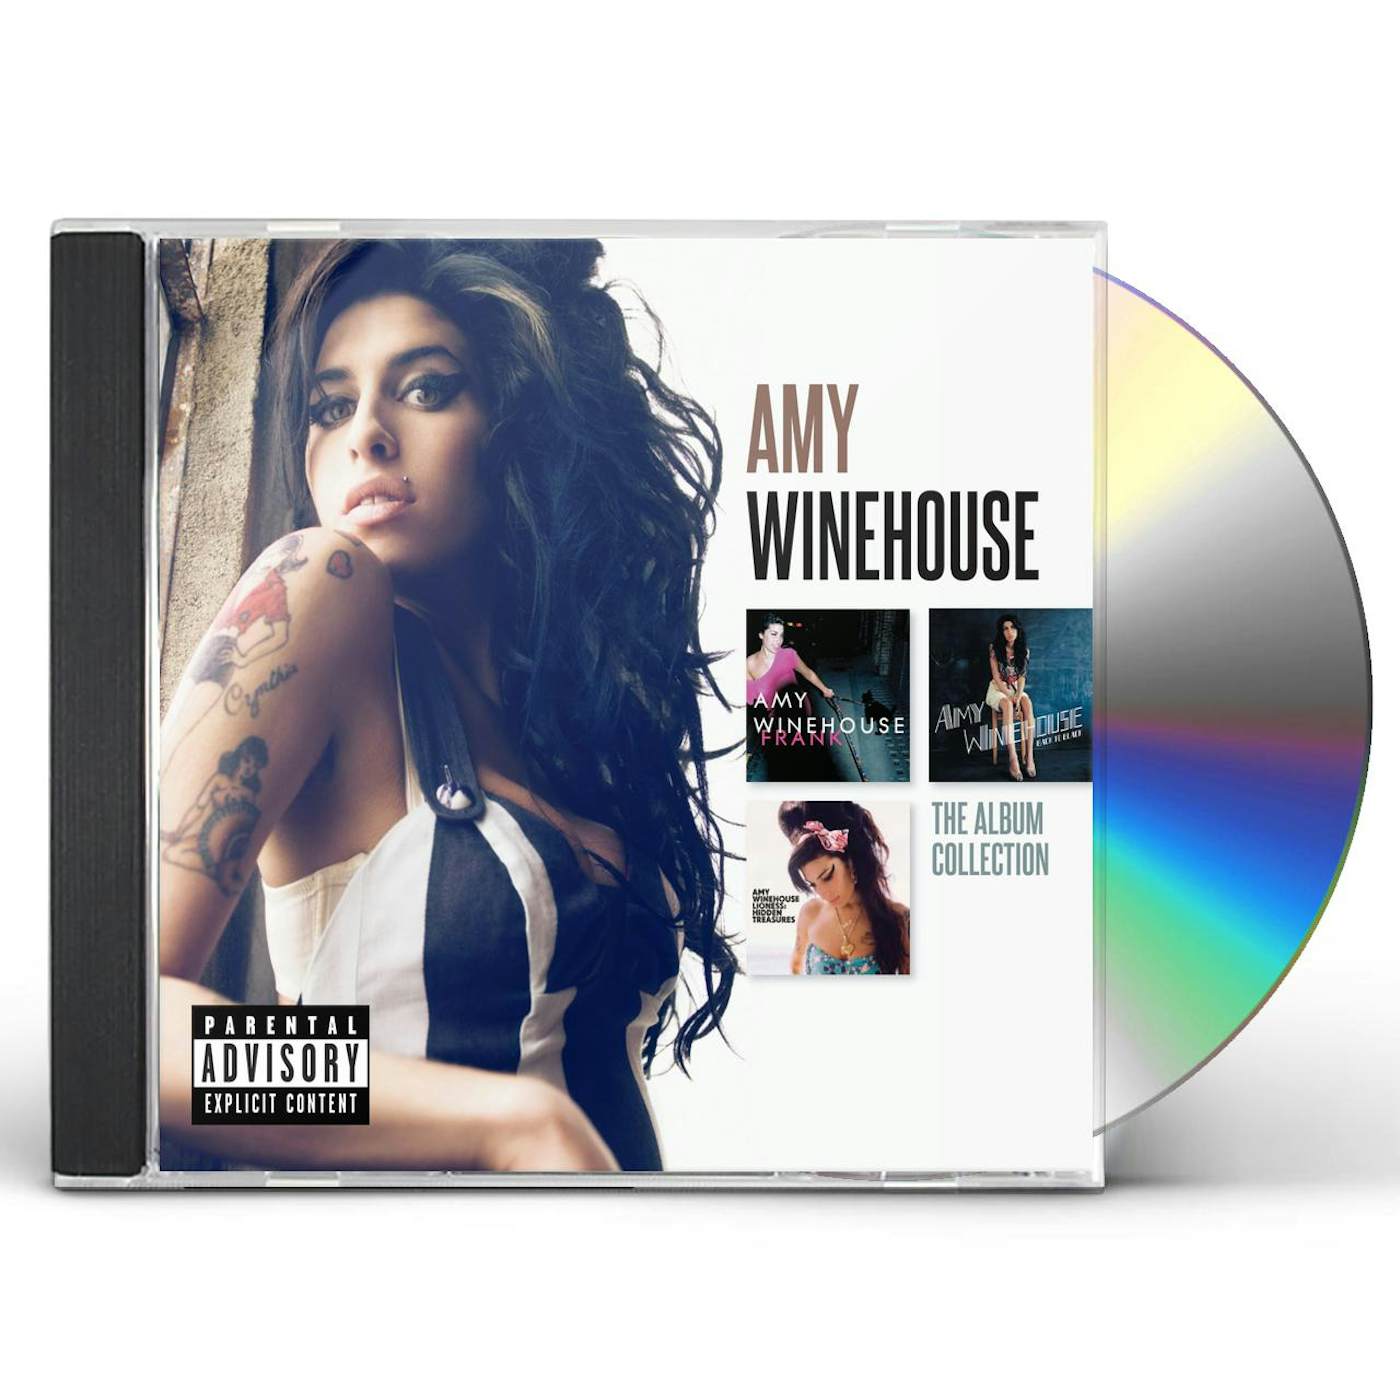 Amy Winehouse ALBUM COLLECTION CD